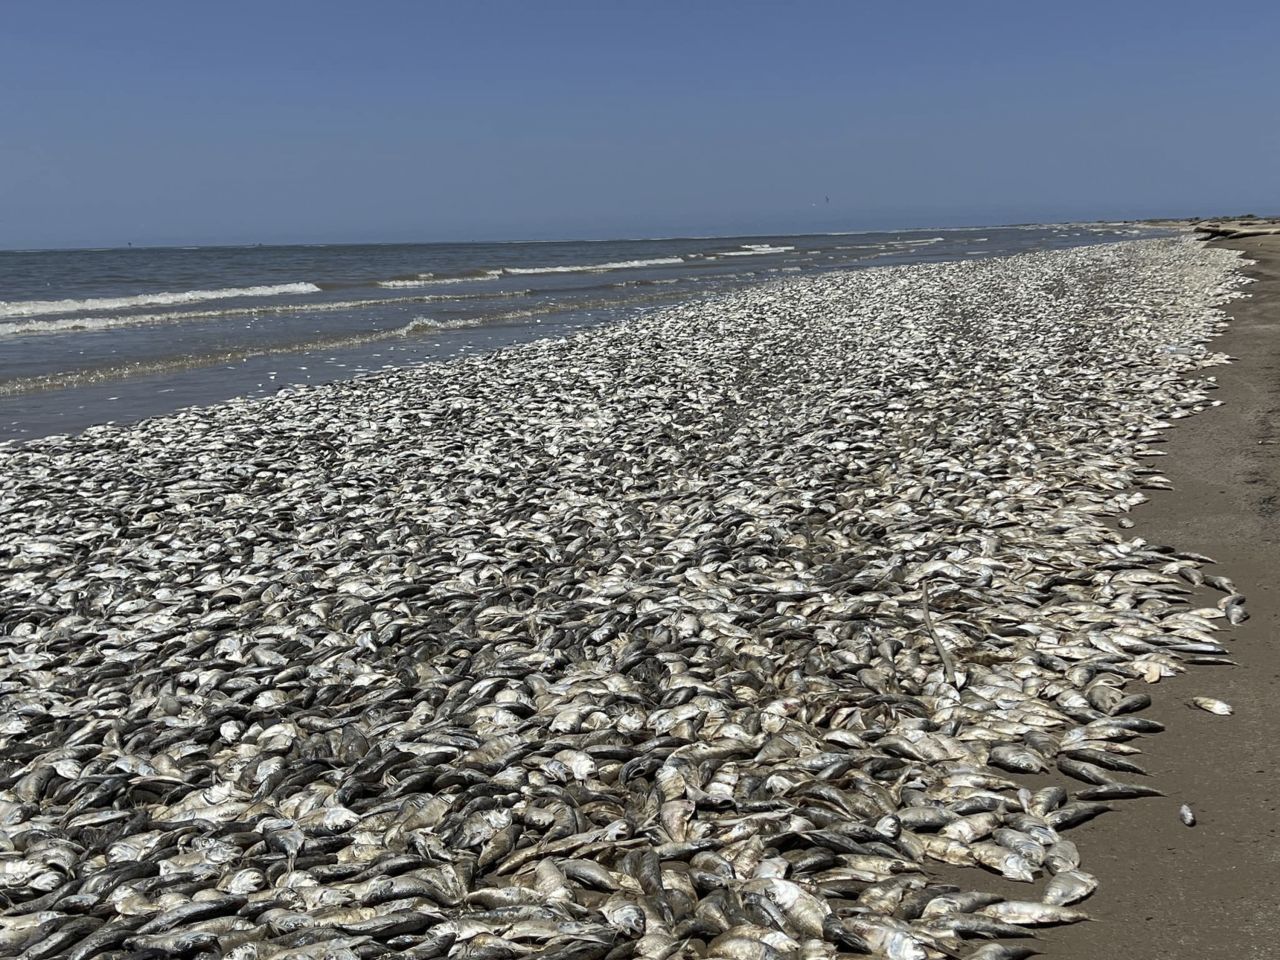 <a href="https://www.cnn.com/2023/06/10/us/dead-fish-texas-gulf-coast-beaches-trnd/index.html" target="_blank">Thousands of dead fish</a> are seen on Quintana Beach in Texas on Sunday, June 11. Colder water tends to hold more oxygen, and the warmer sea waters along Quintana Beach could have contributed to the killing of the fish, park officials said on Facebook. "Fish kills like this are common in the summer when temperatures increase," Lerrin Johnson, a spokesperson with the Texas Parks and Wildlife Department, said in a statement to CNN.